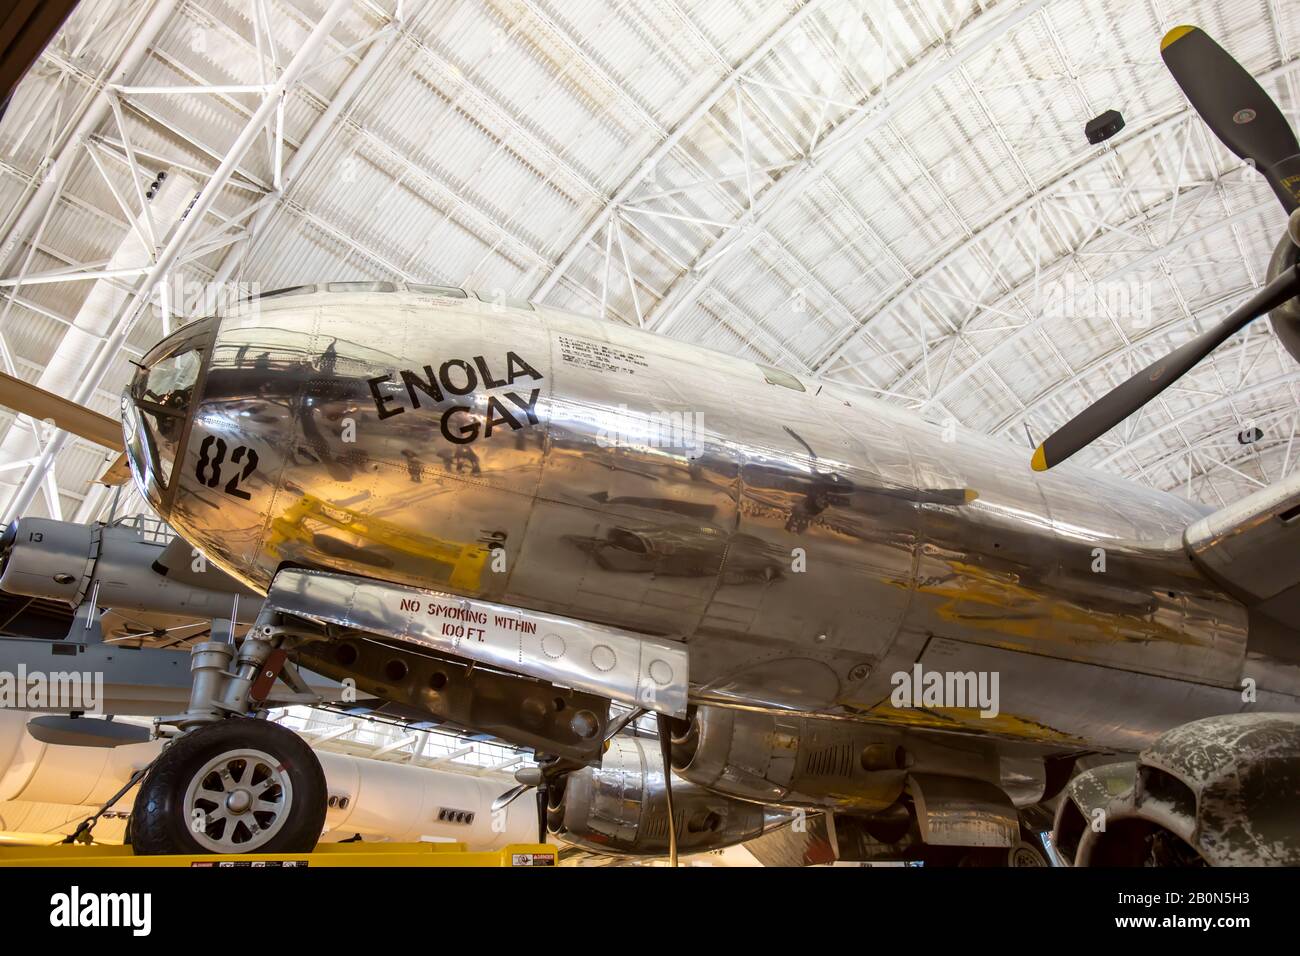 Chantilly, Virginia - February 16, 2020  - The Enola Gay WWII plane at the Steven F. Udvar-Hazy Center of the Smithsonian Air and Space Museum in Chan Stock Photo